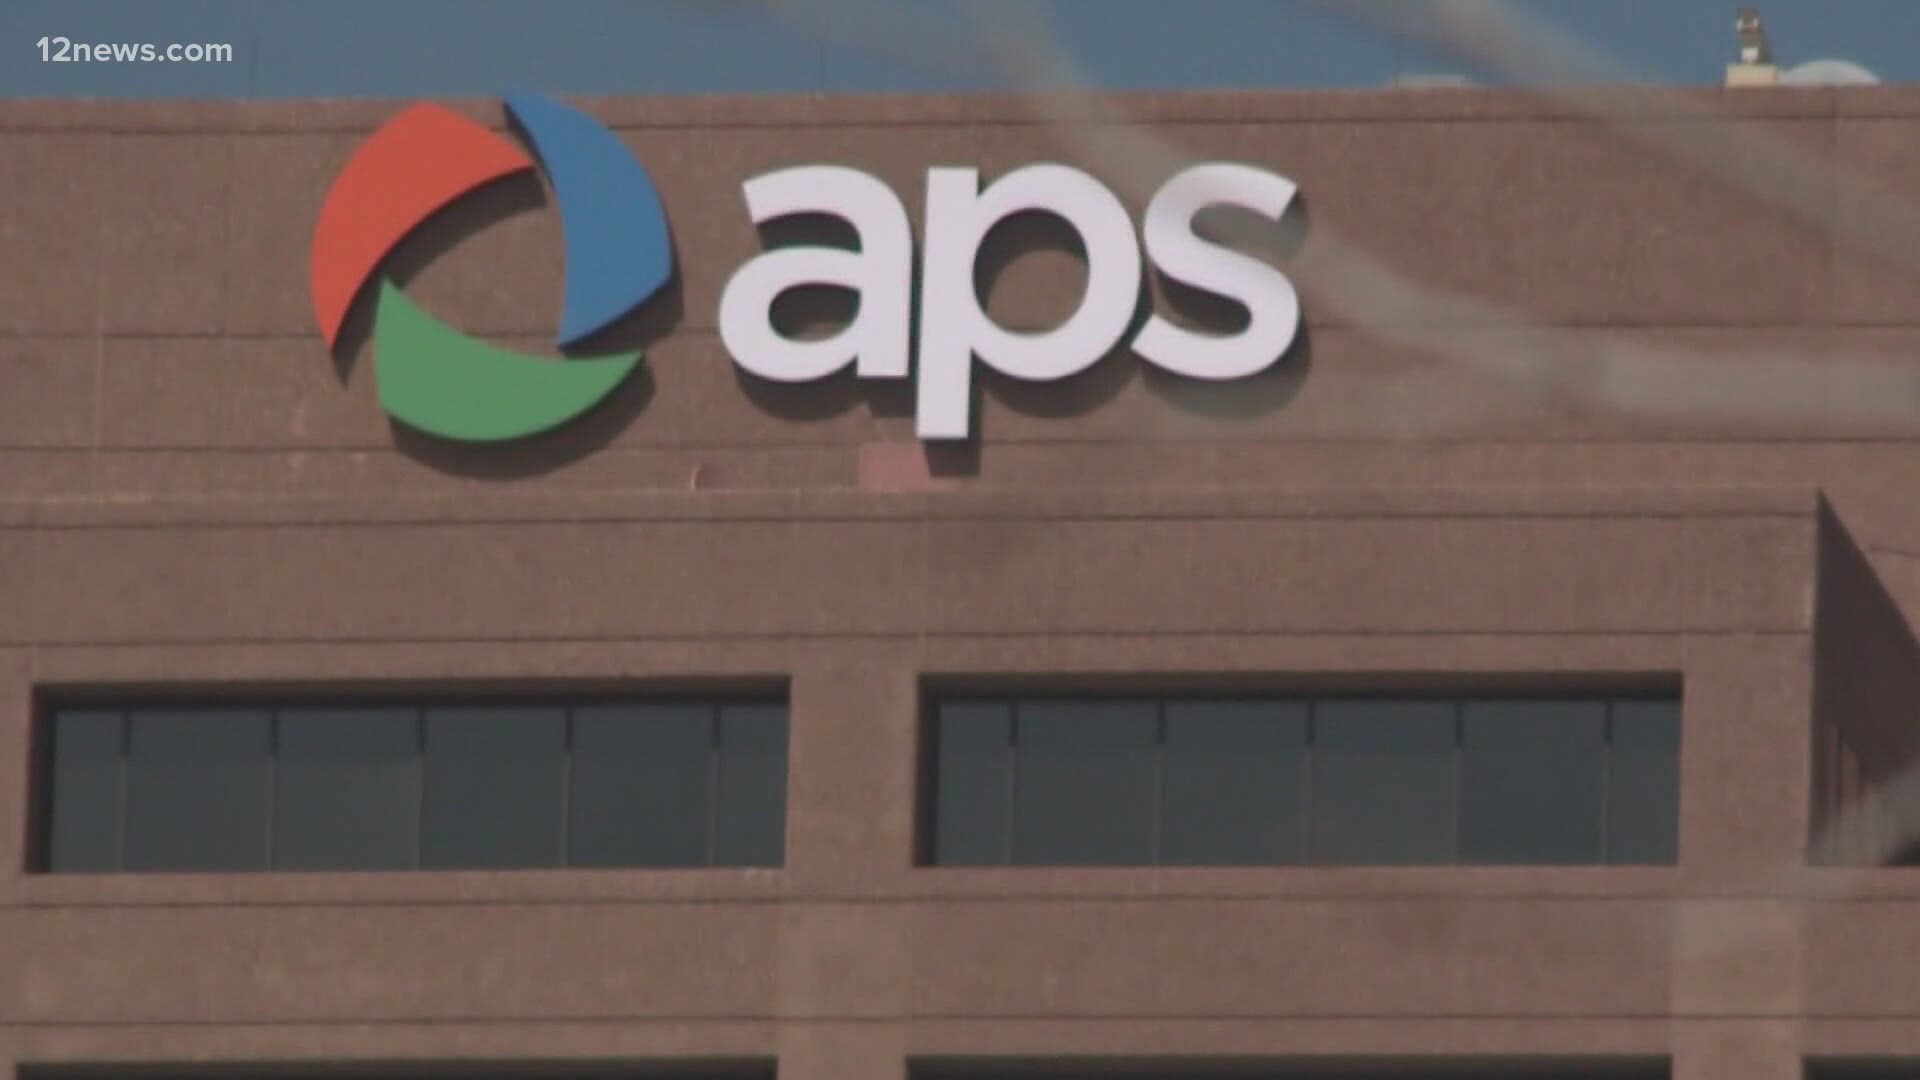 Arizona Attorney General Mark Brnovich is touting the settlement reached with electricity giant, APS. $25 million will go back to customers because of the settlement